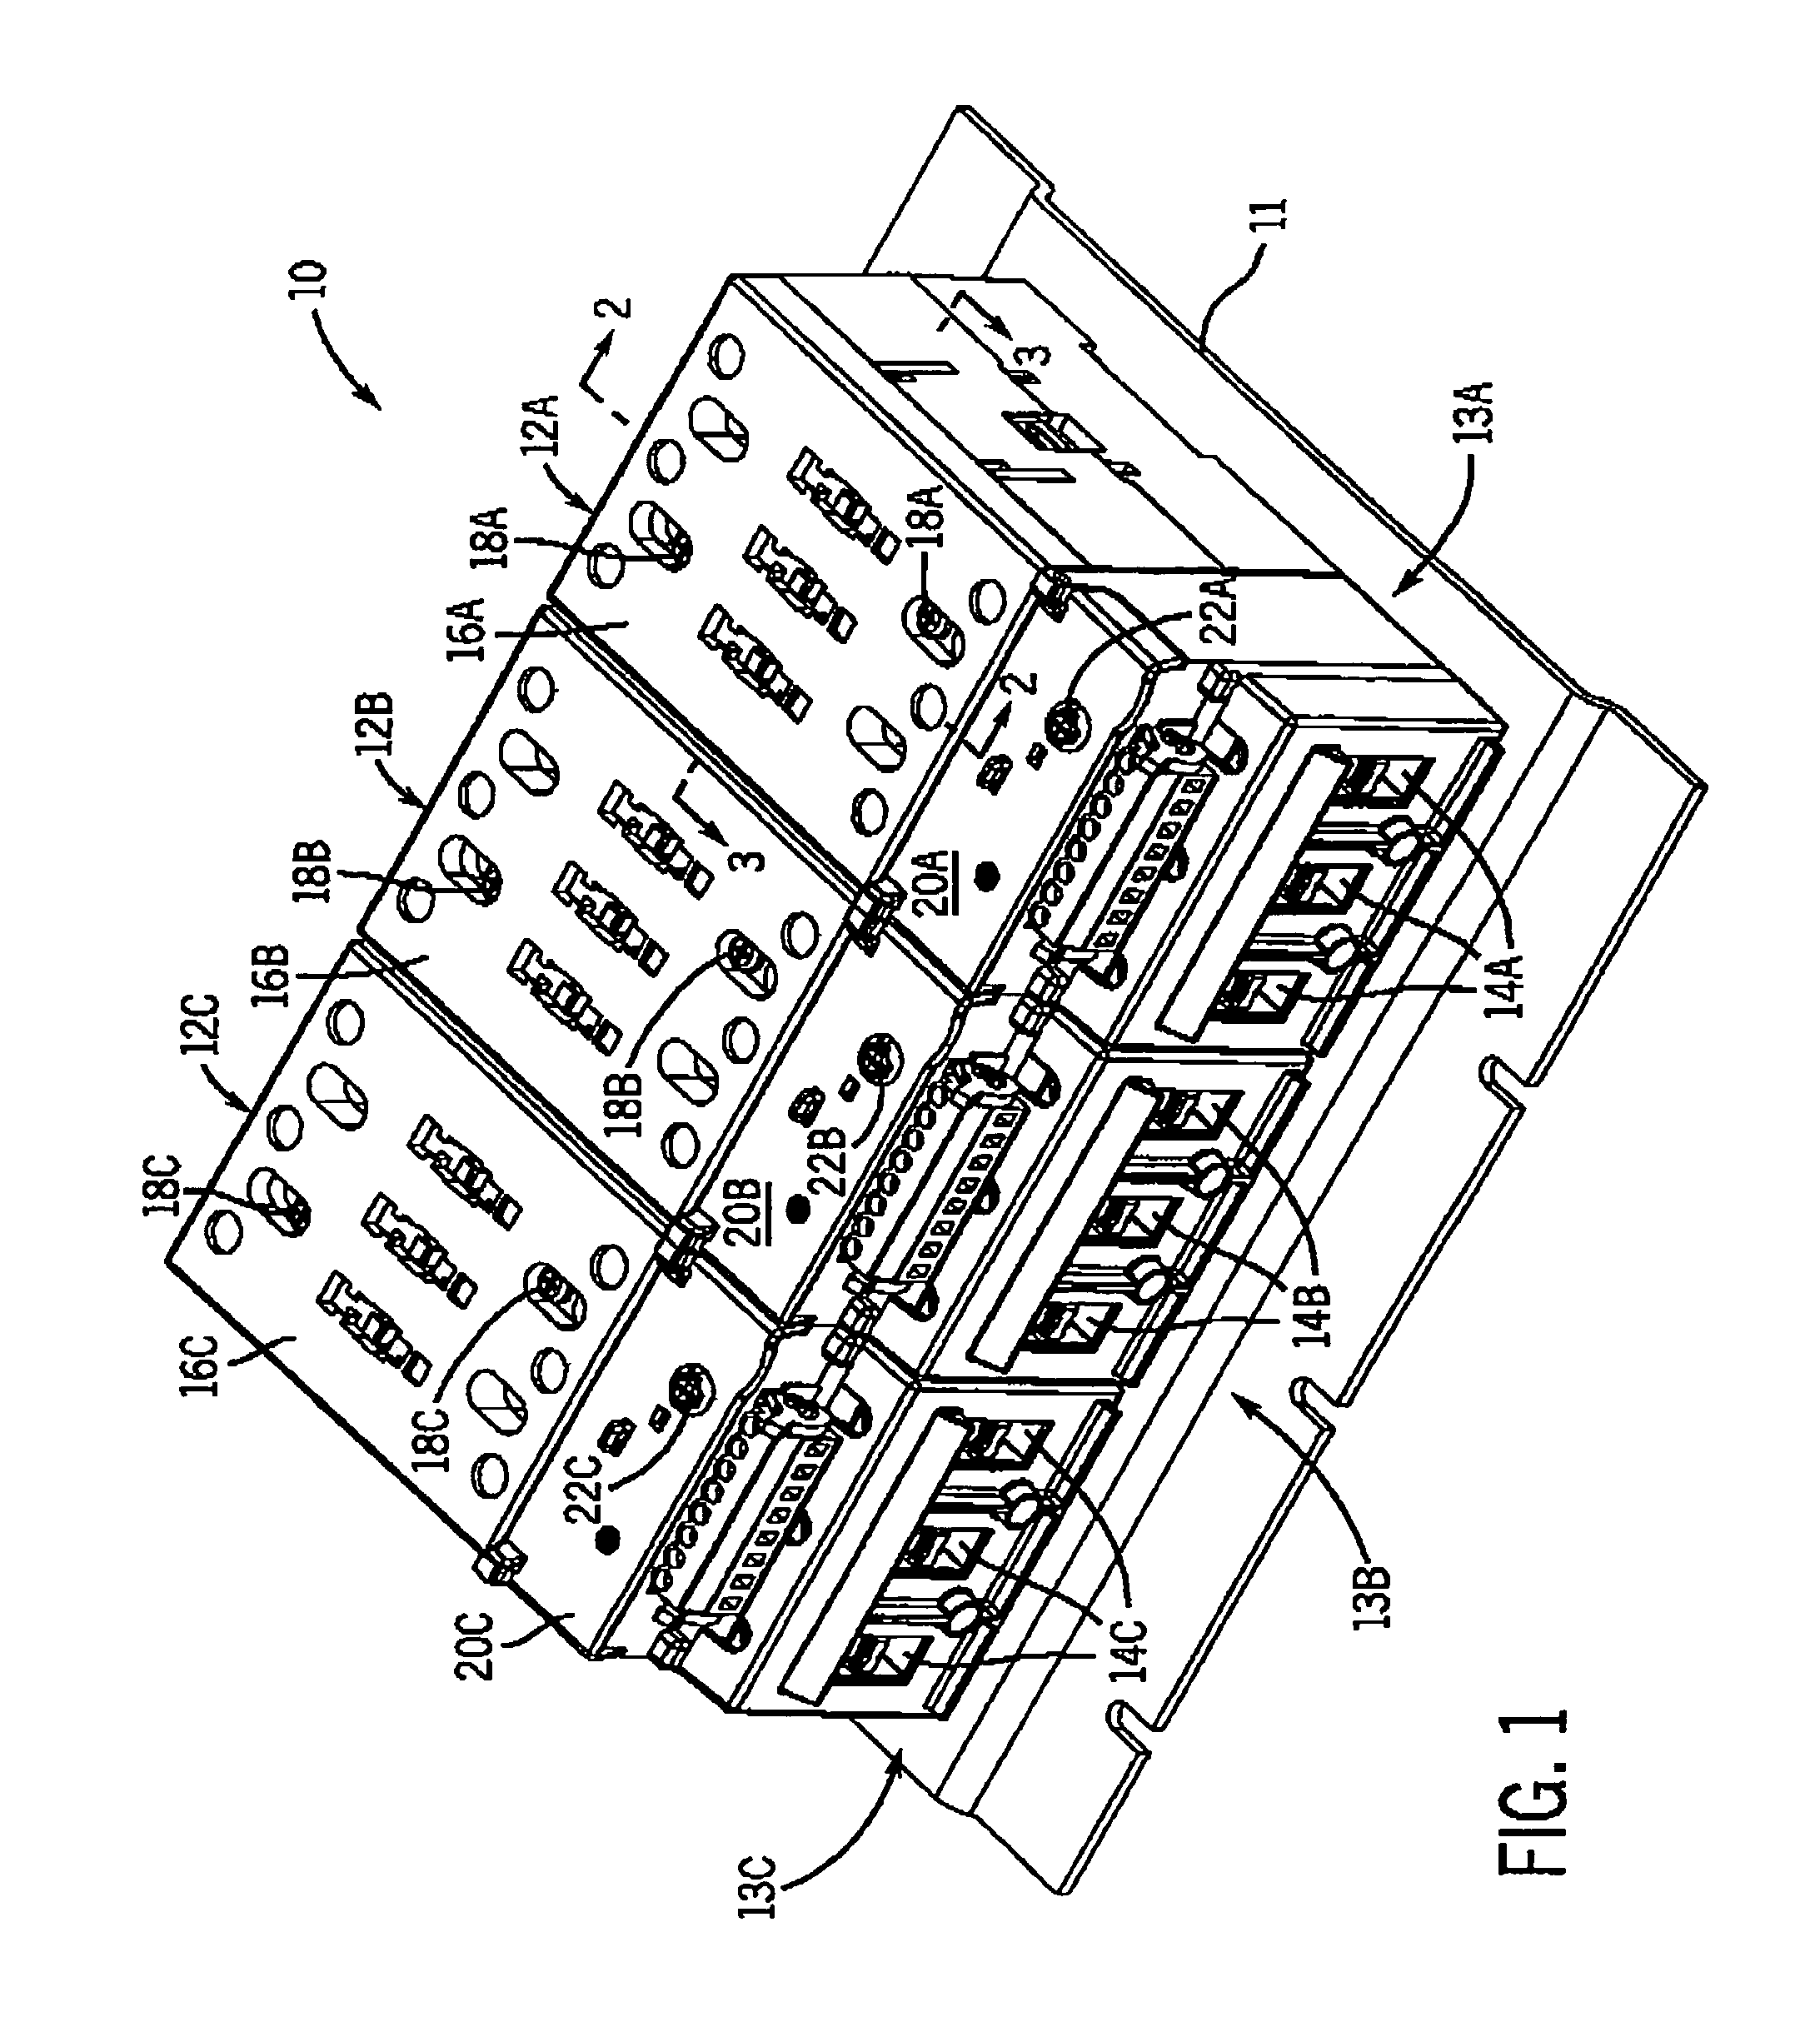 Isolation contactor assembly having independently controllable contactors